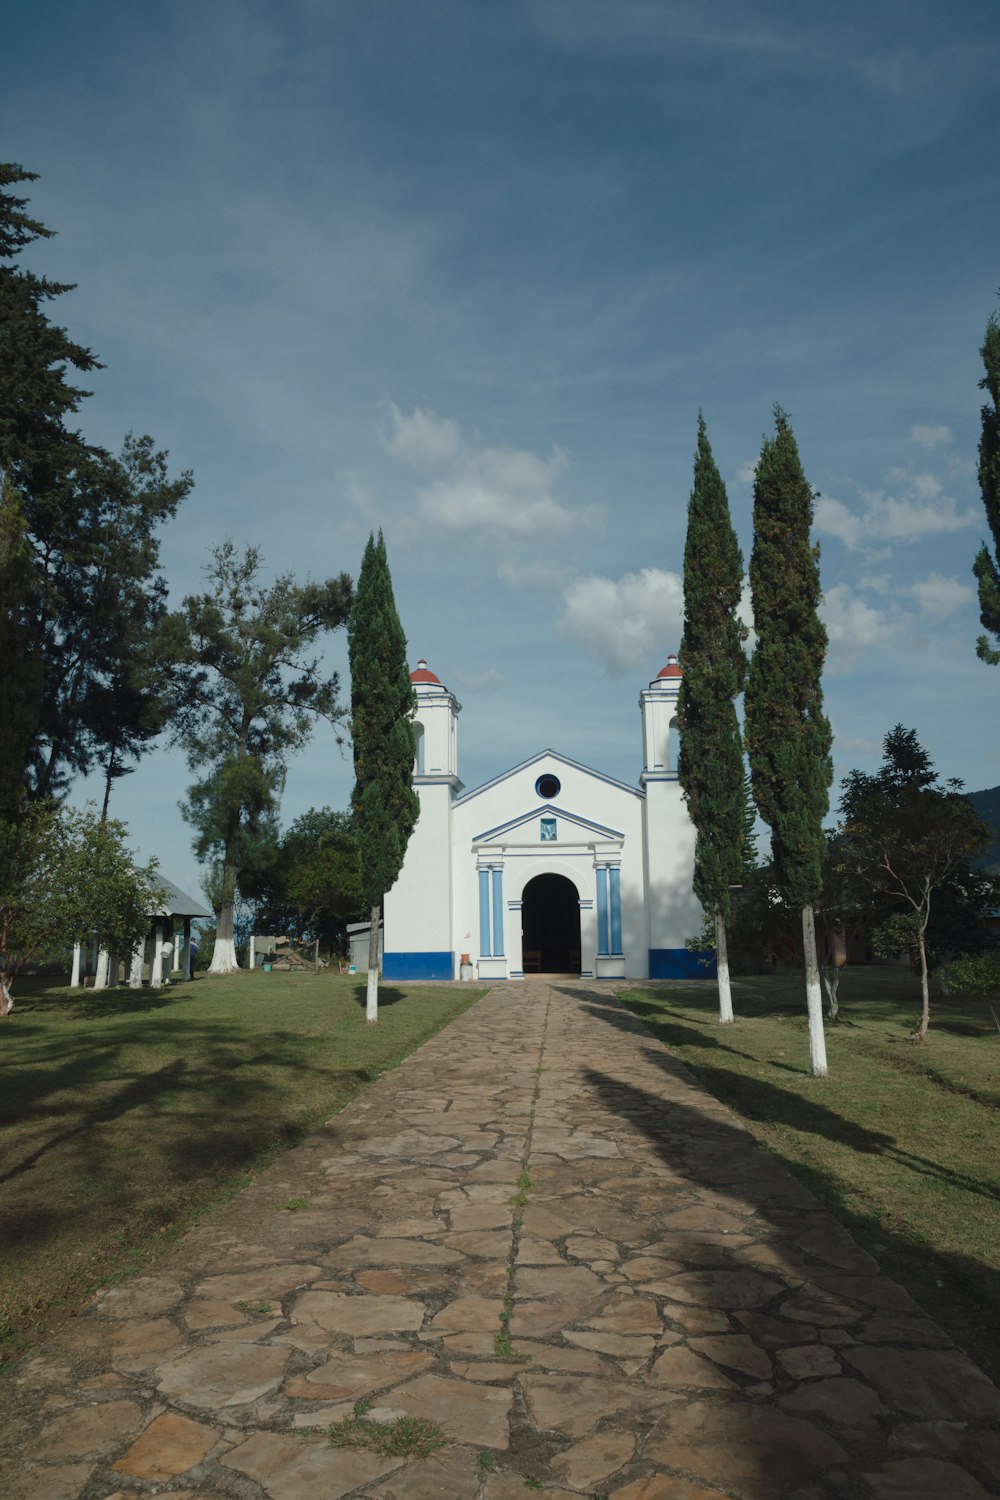 a white church with a blue door on a dirt road